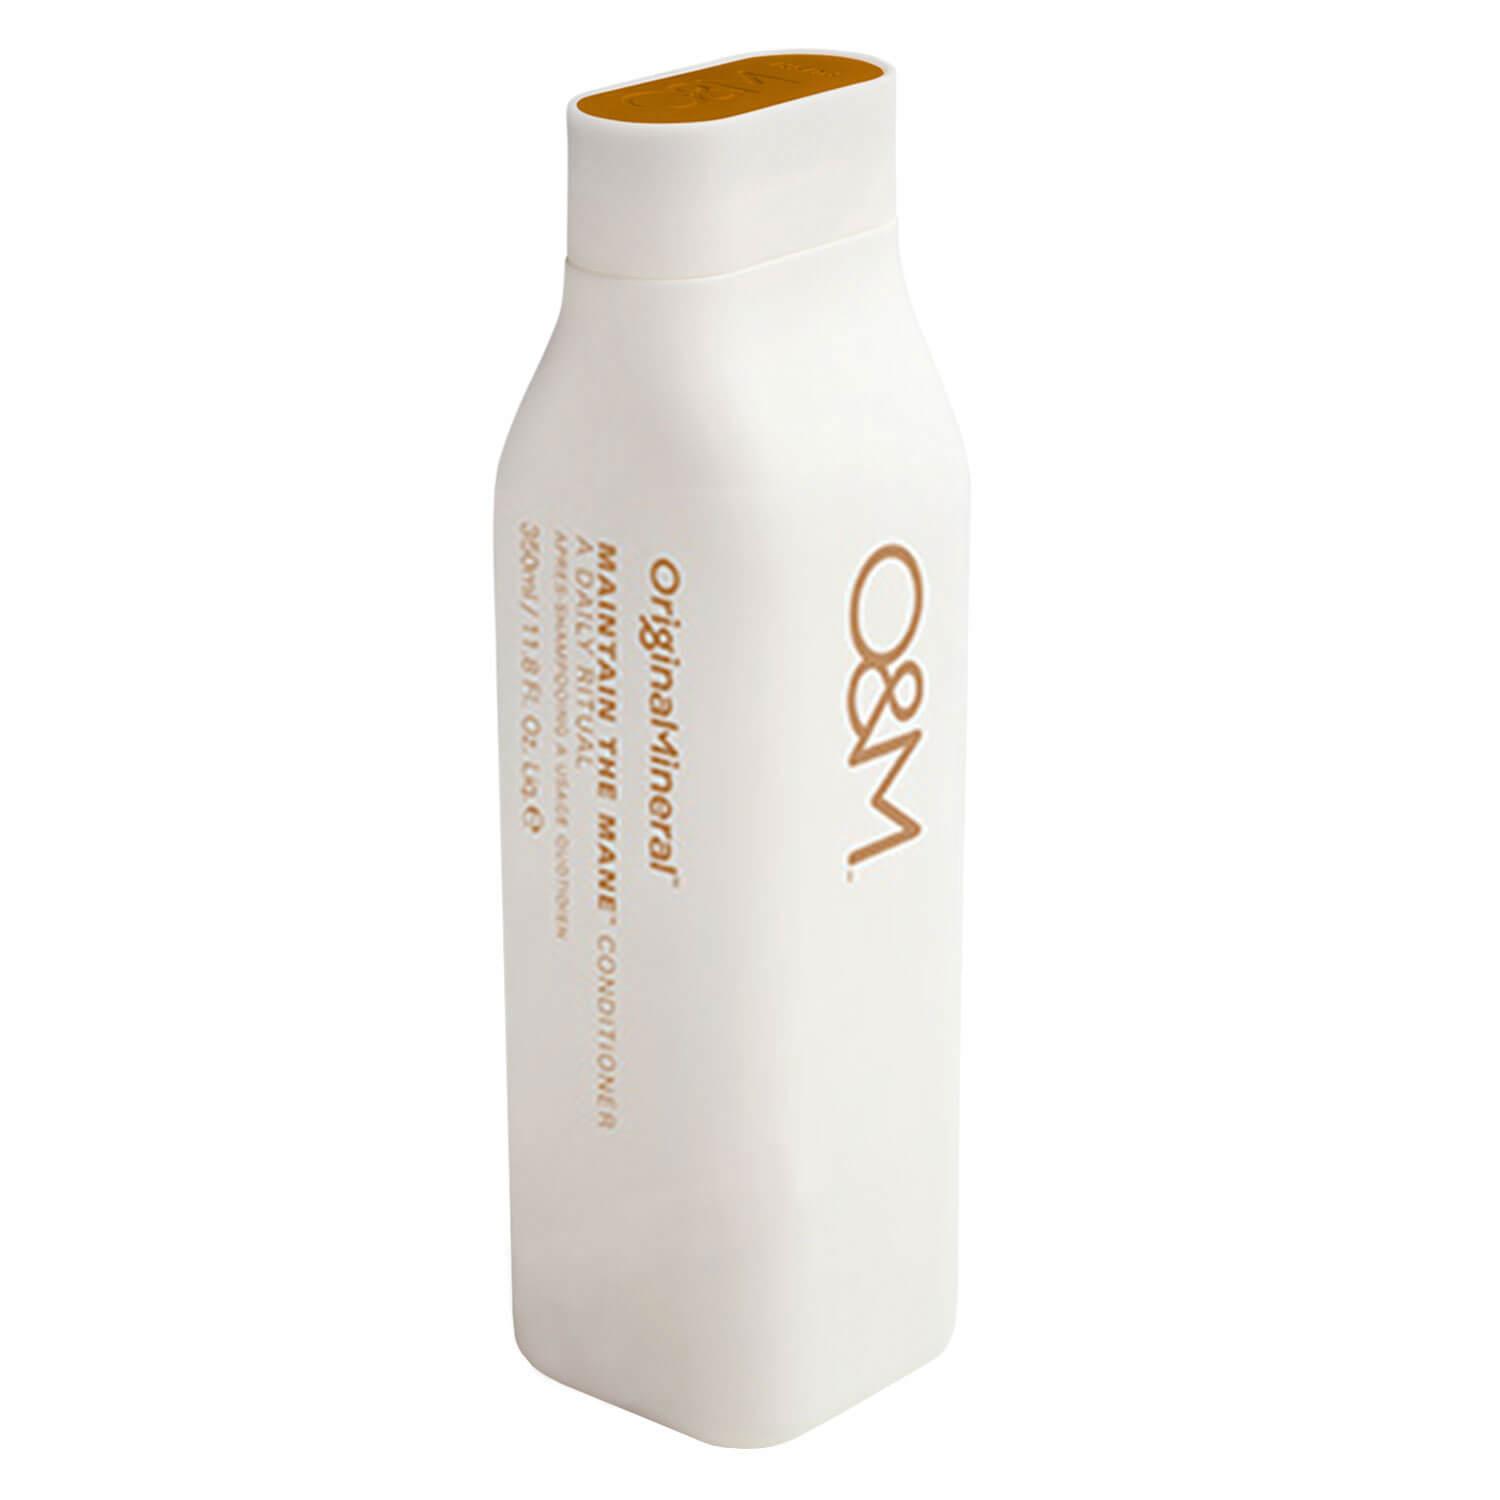 O&M Haircare - Maintain the Mane Daily Conditioner